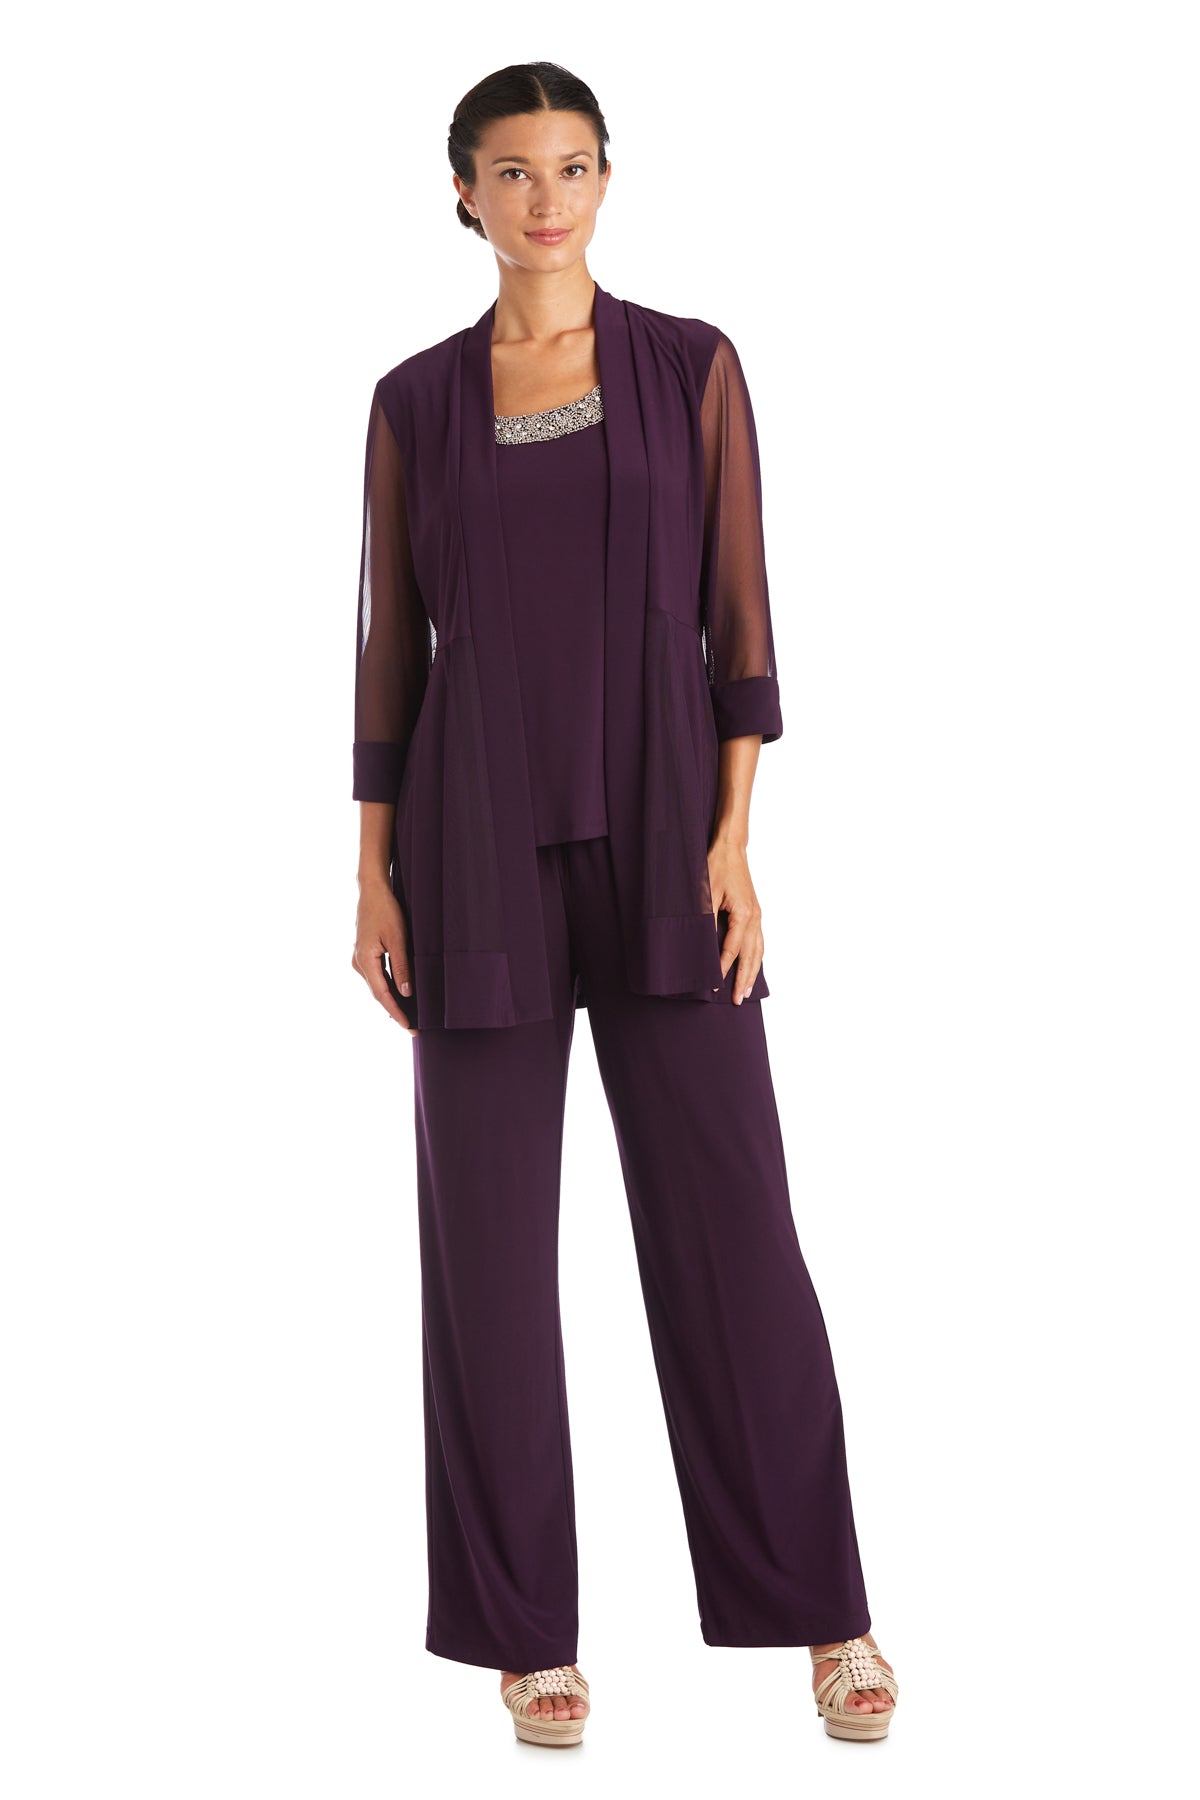 Three Piece Pant Suit with Sheer Inserts, Beading and Diamante - Petit ...